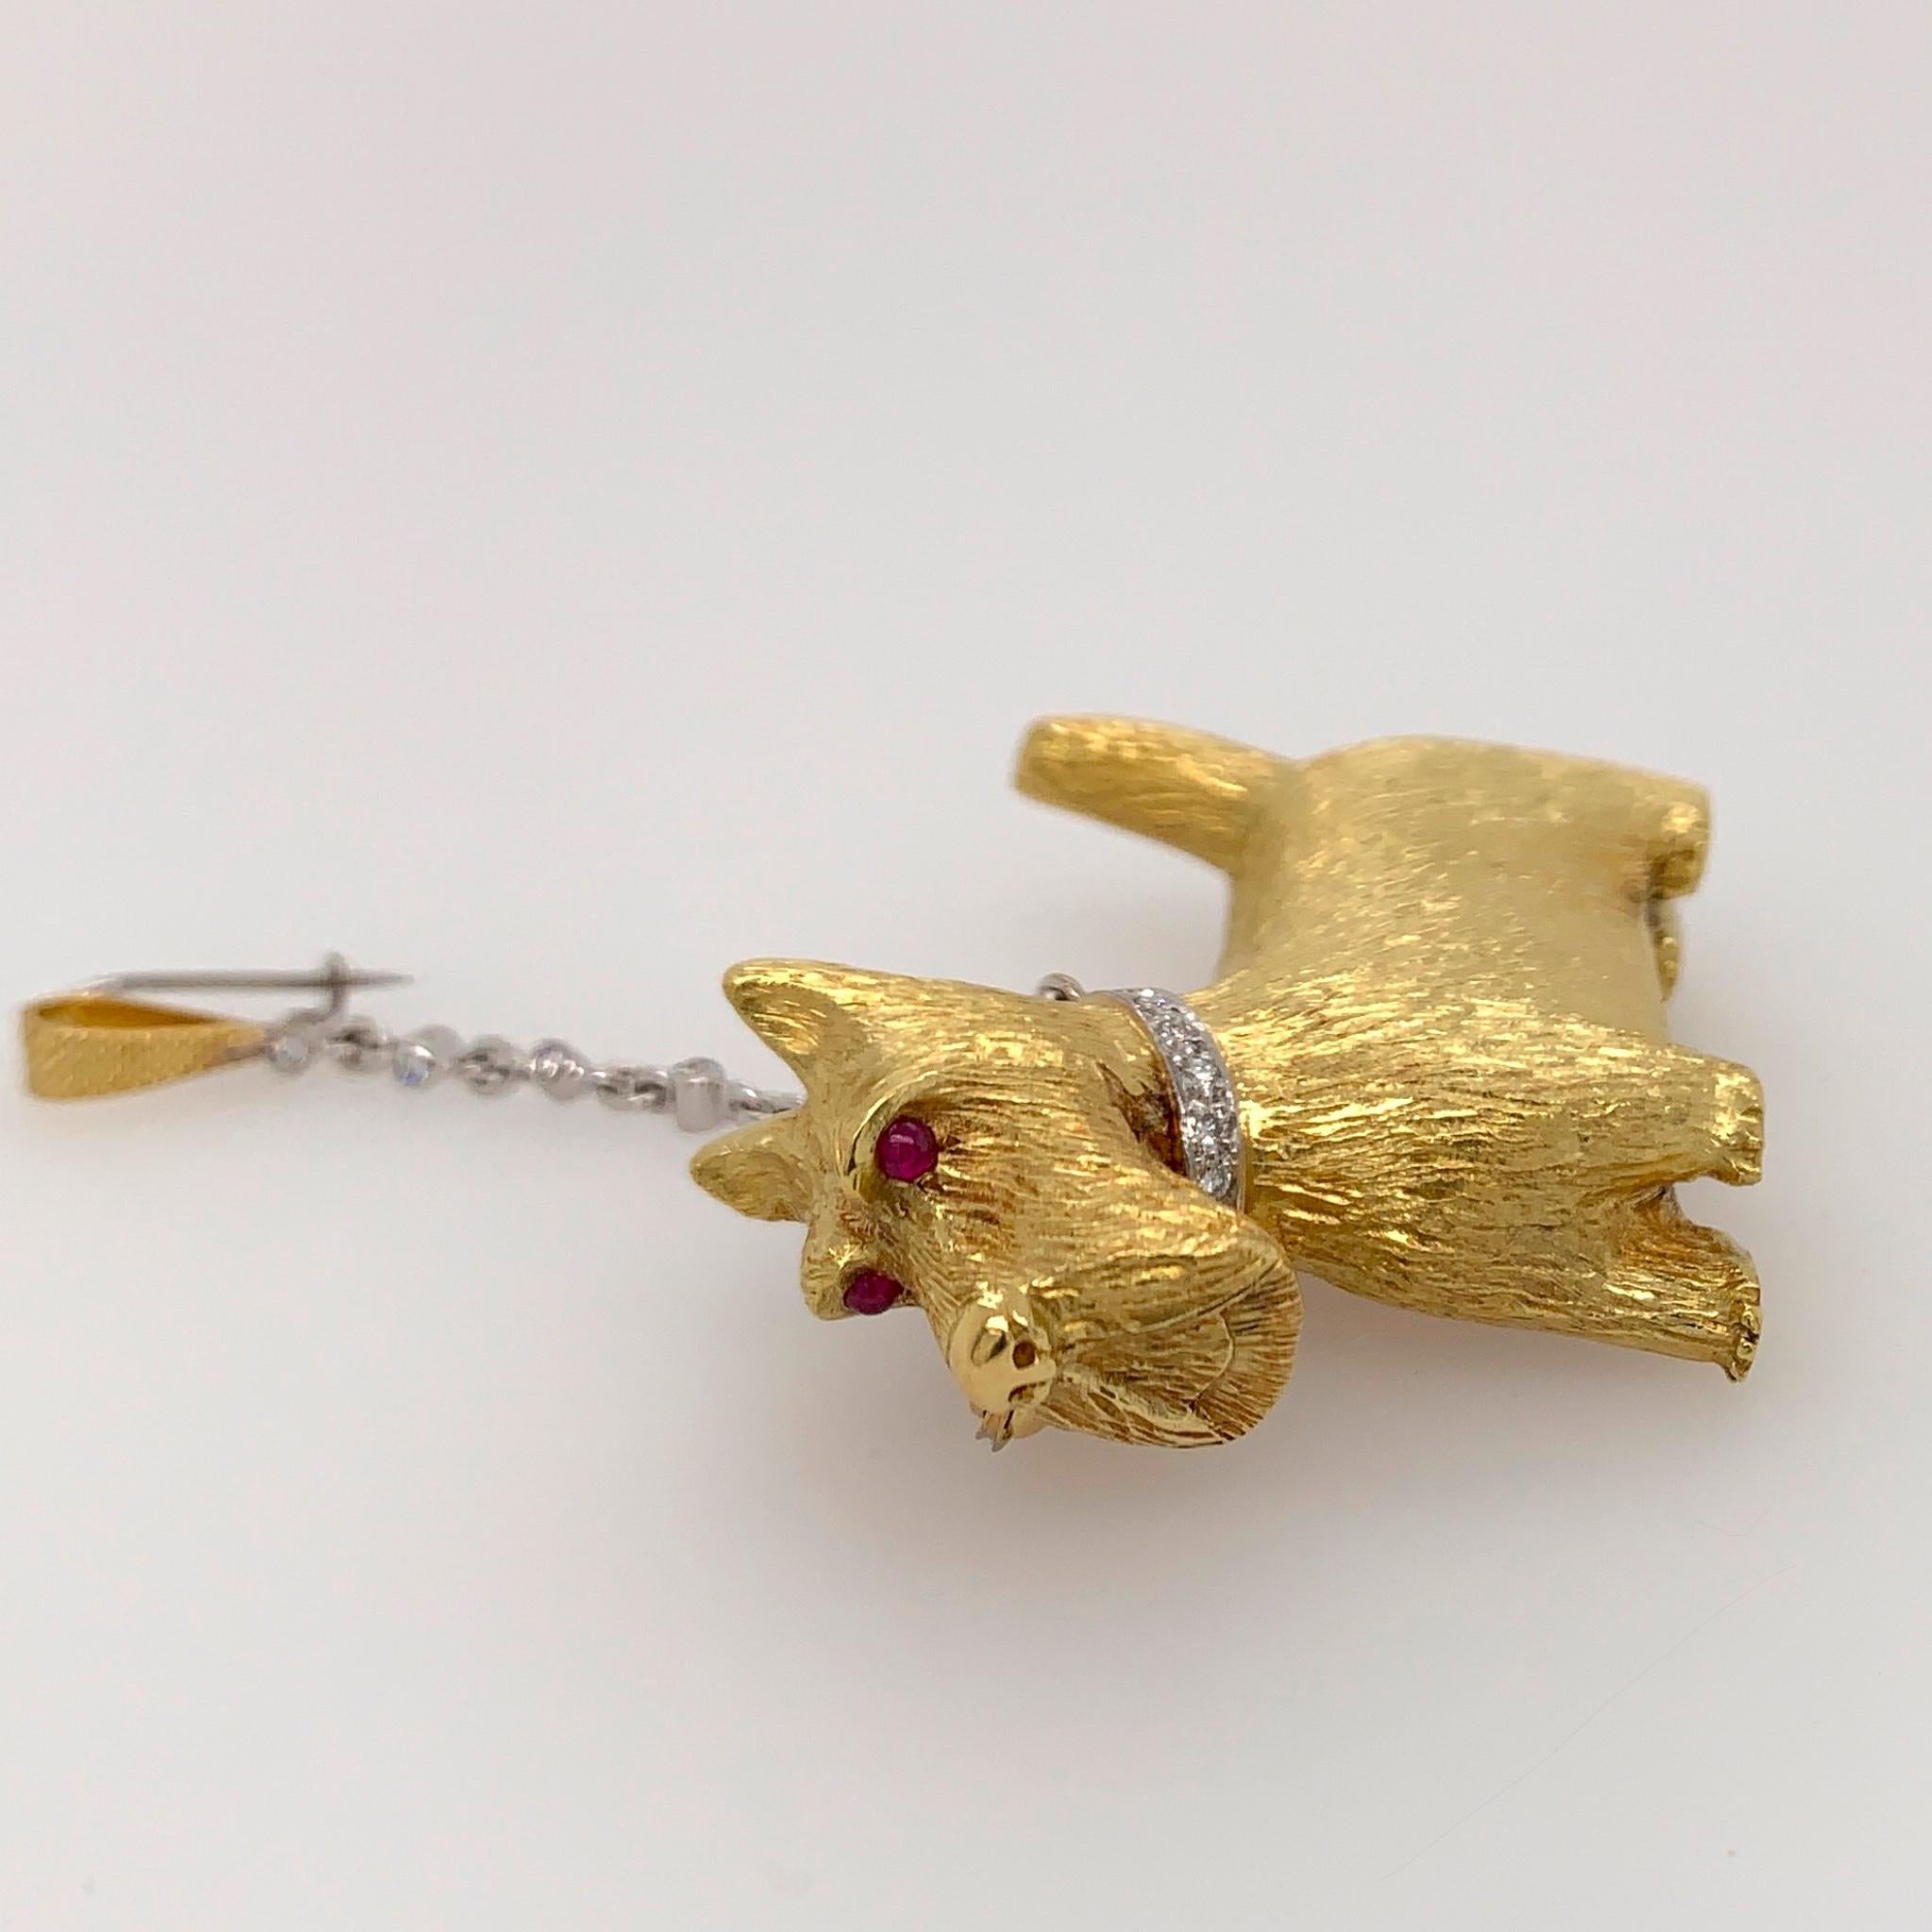 18K yellow and white gold Scottie dog brooch with 2 pins, one for the leash and one for the pooch! Designed and fabricated by E. Wolfe & Co. The white gold leash and collar have a total of 14 brilliant cut diamonds with a total weight of 0.32 cts.